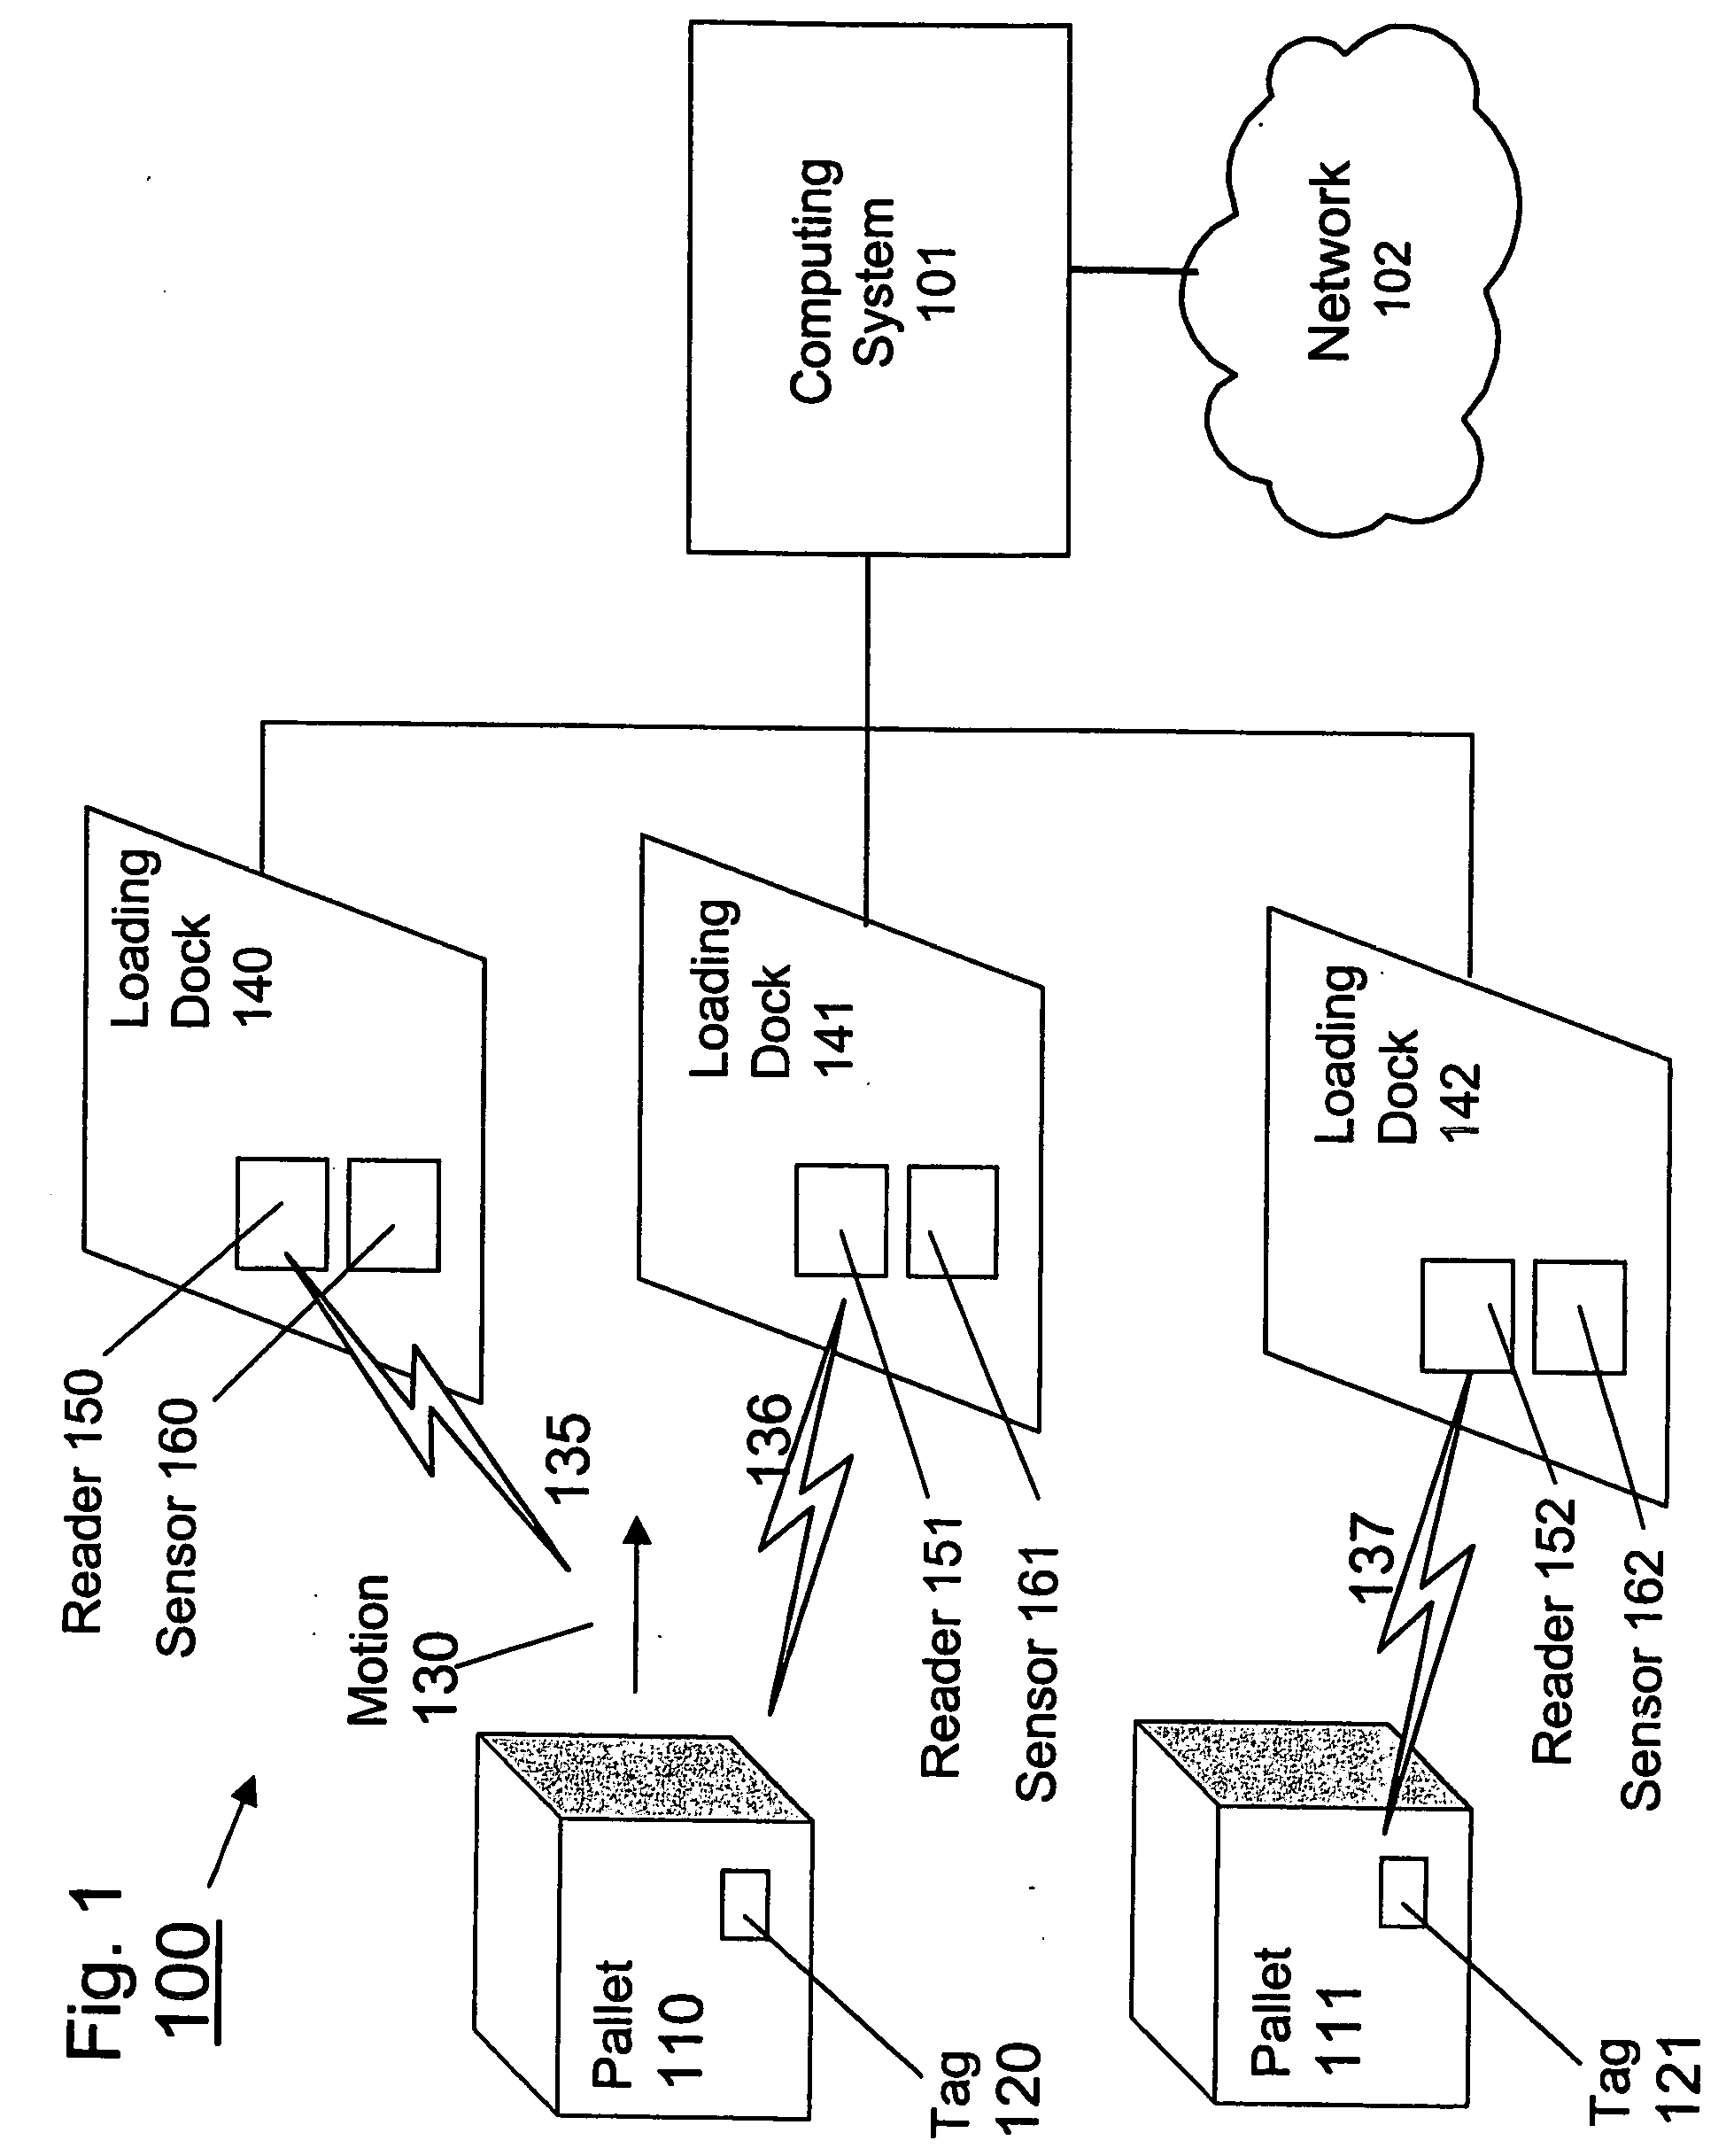 Method and system for proximity tracking-based adaptive power control of radio frequency identification (RFID) interrogators